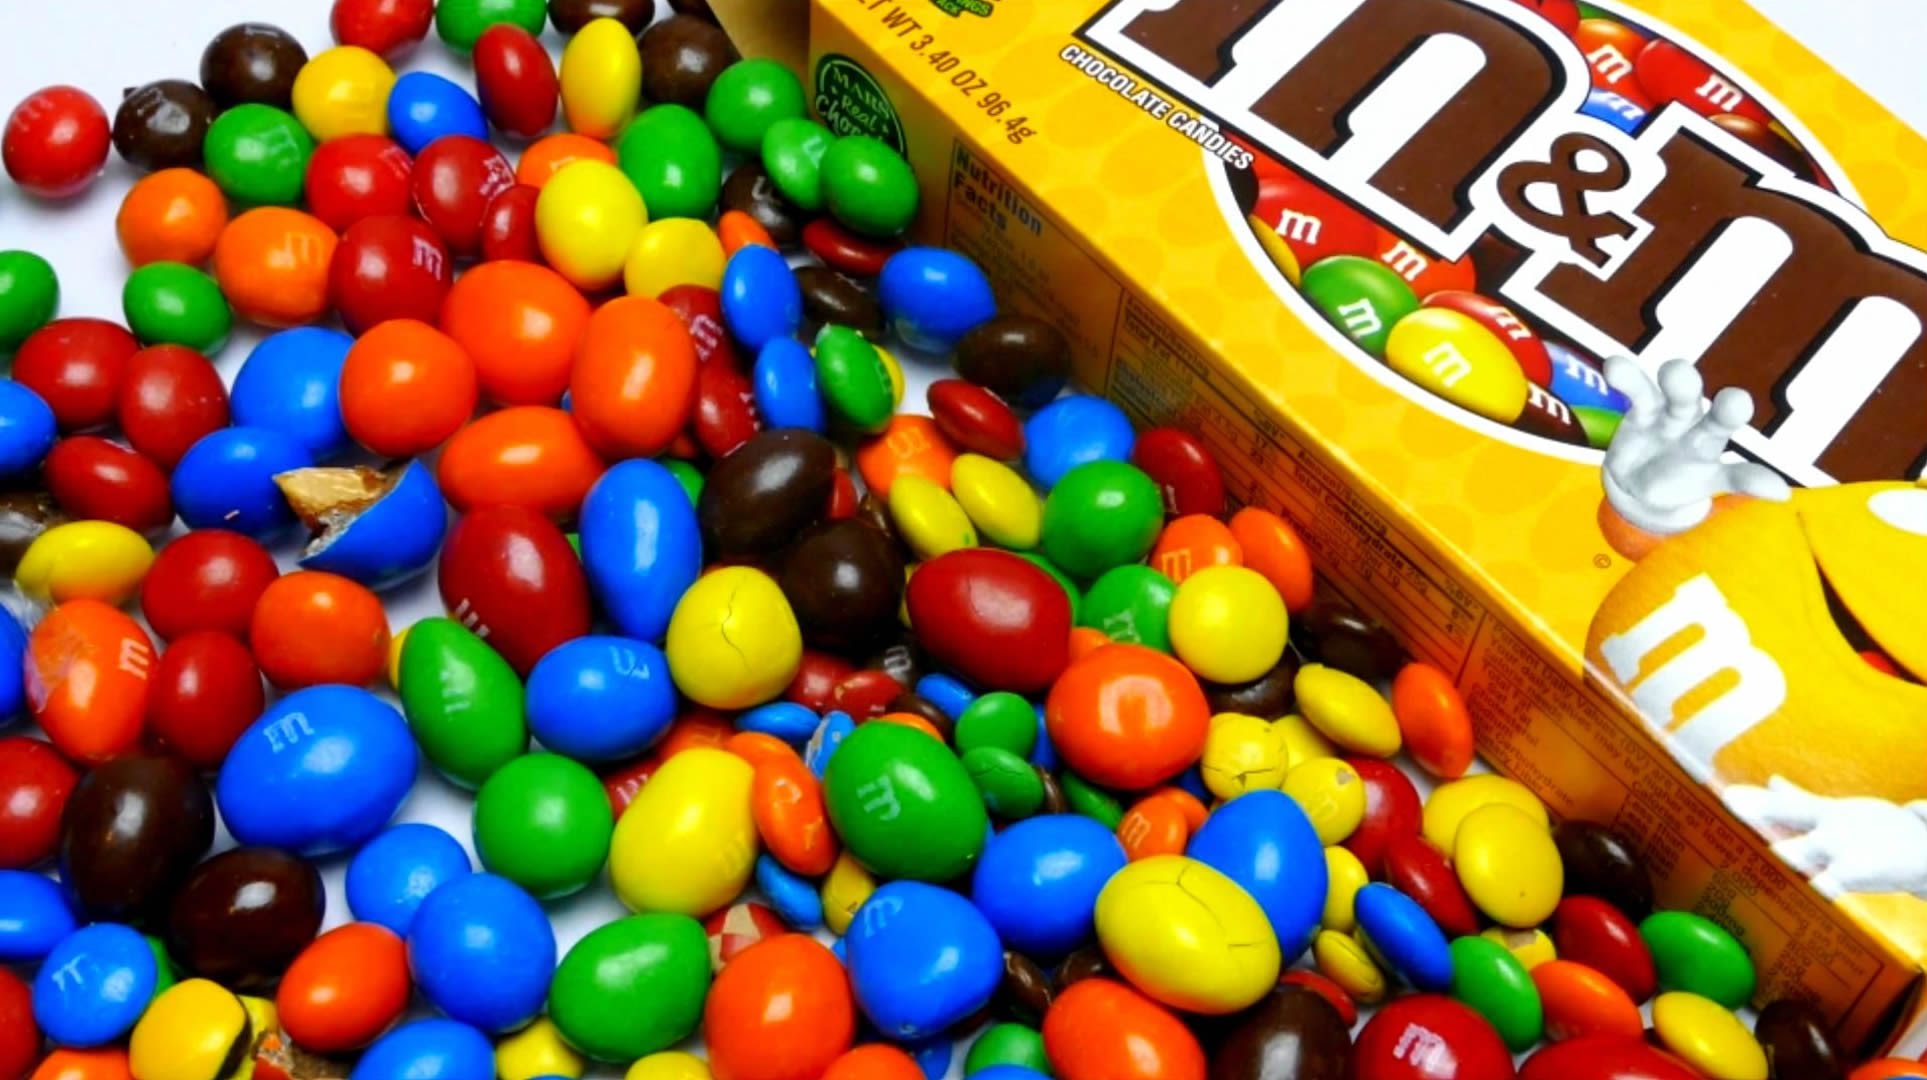 M&m's wallpapers, Products, HQ M&m's